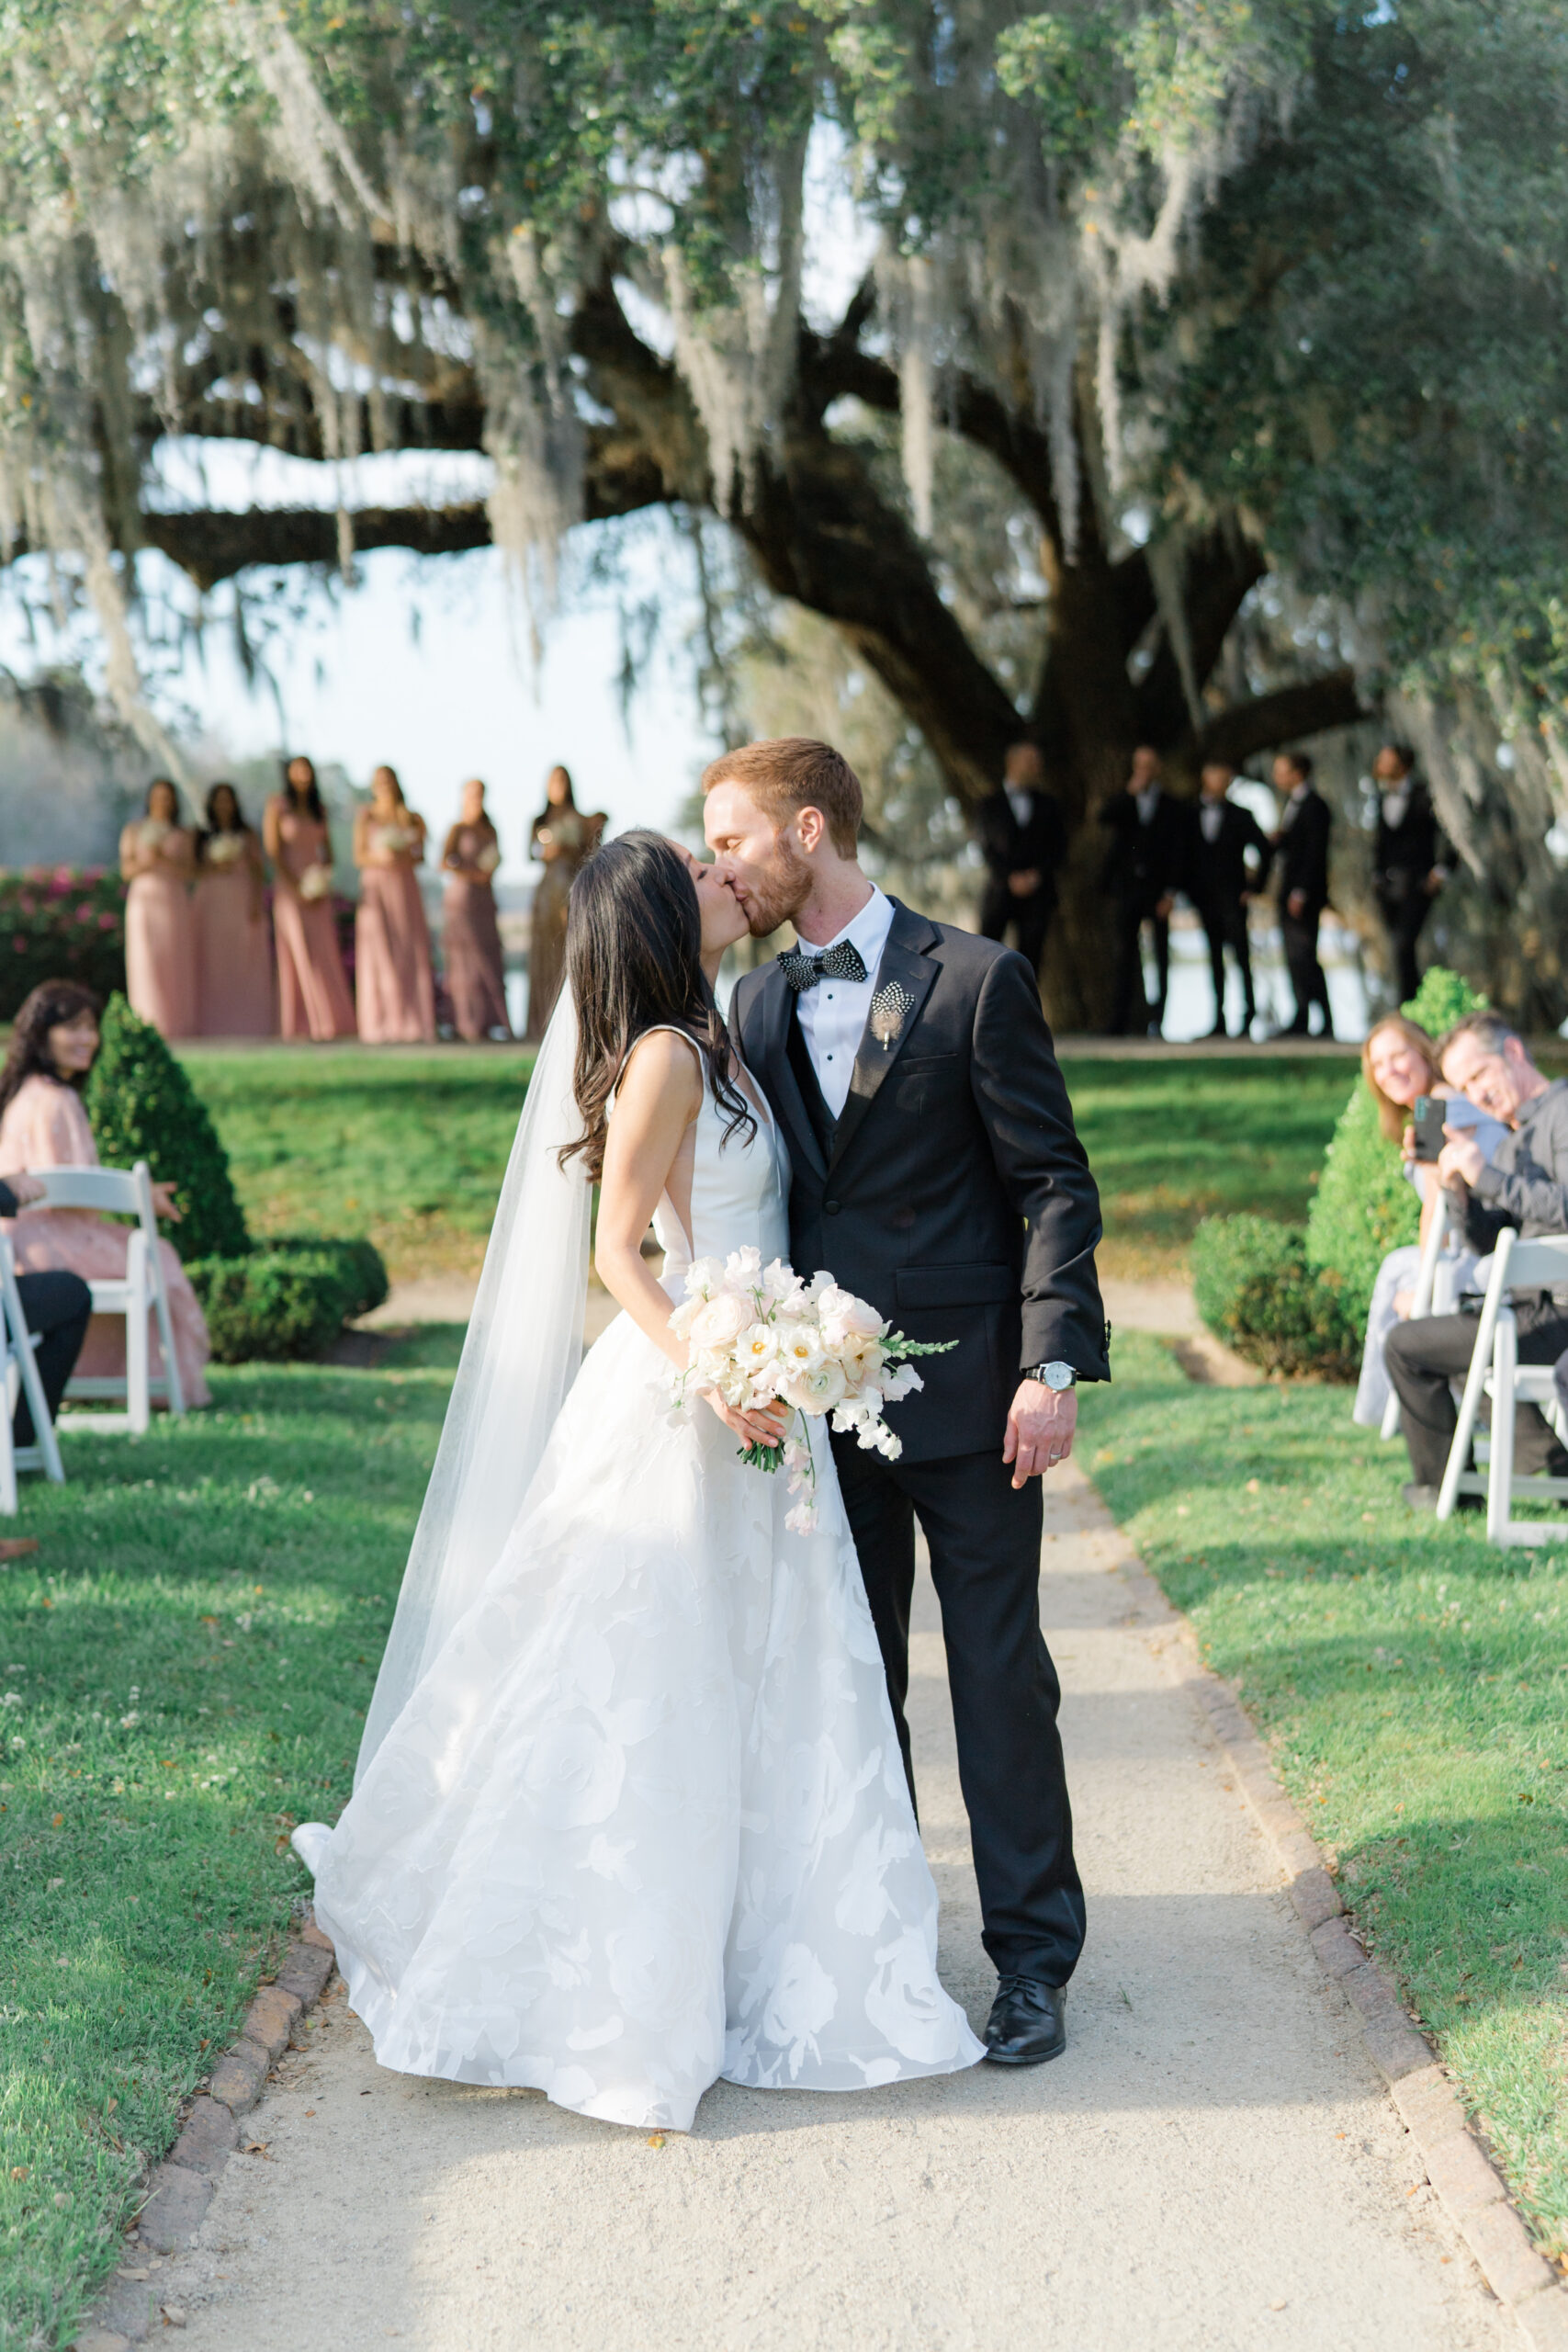 Middleton Place wedding ceremony aisle exit kiss. Perfect lighting. Red-head groom and asian bride. Charleston destination wedding.